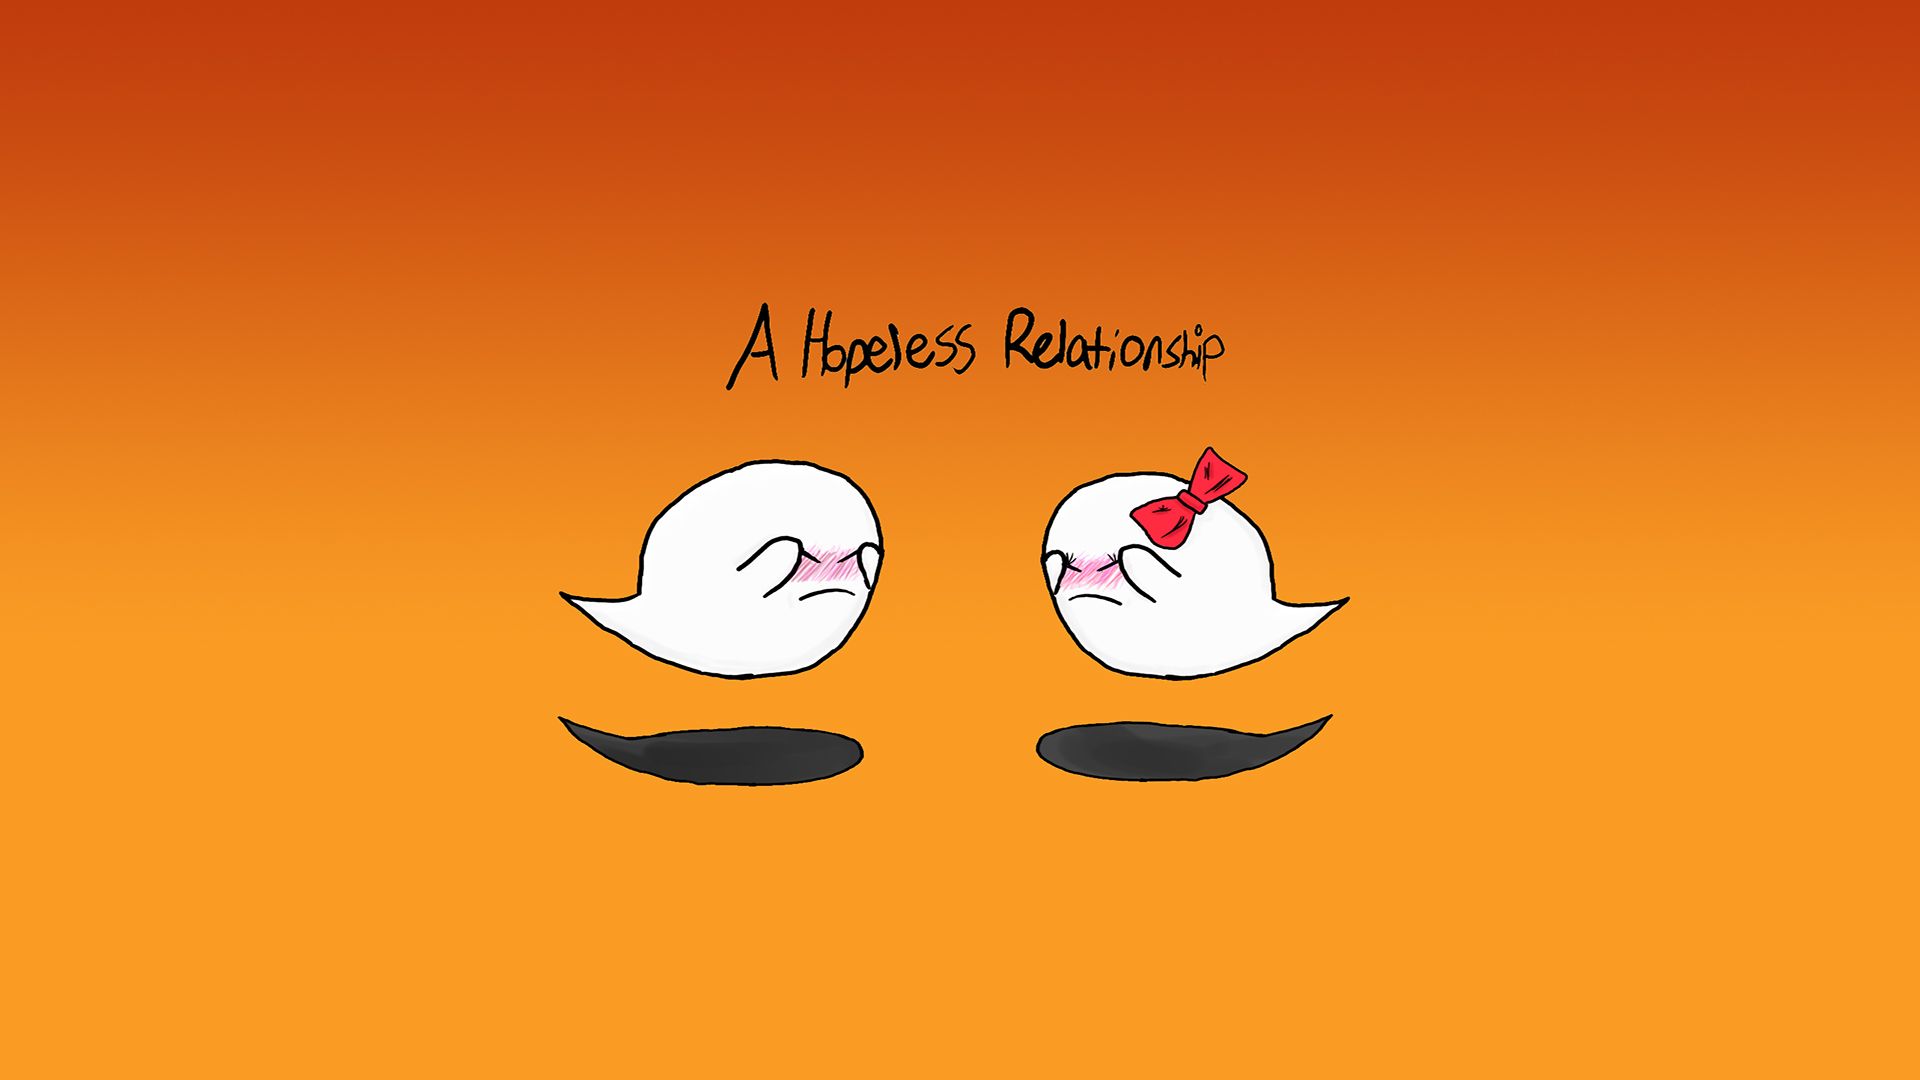 Adorable HDQ Background of Relationship, 46 Relationship HQ Definition Wallpaper